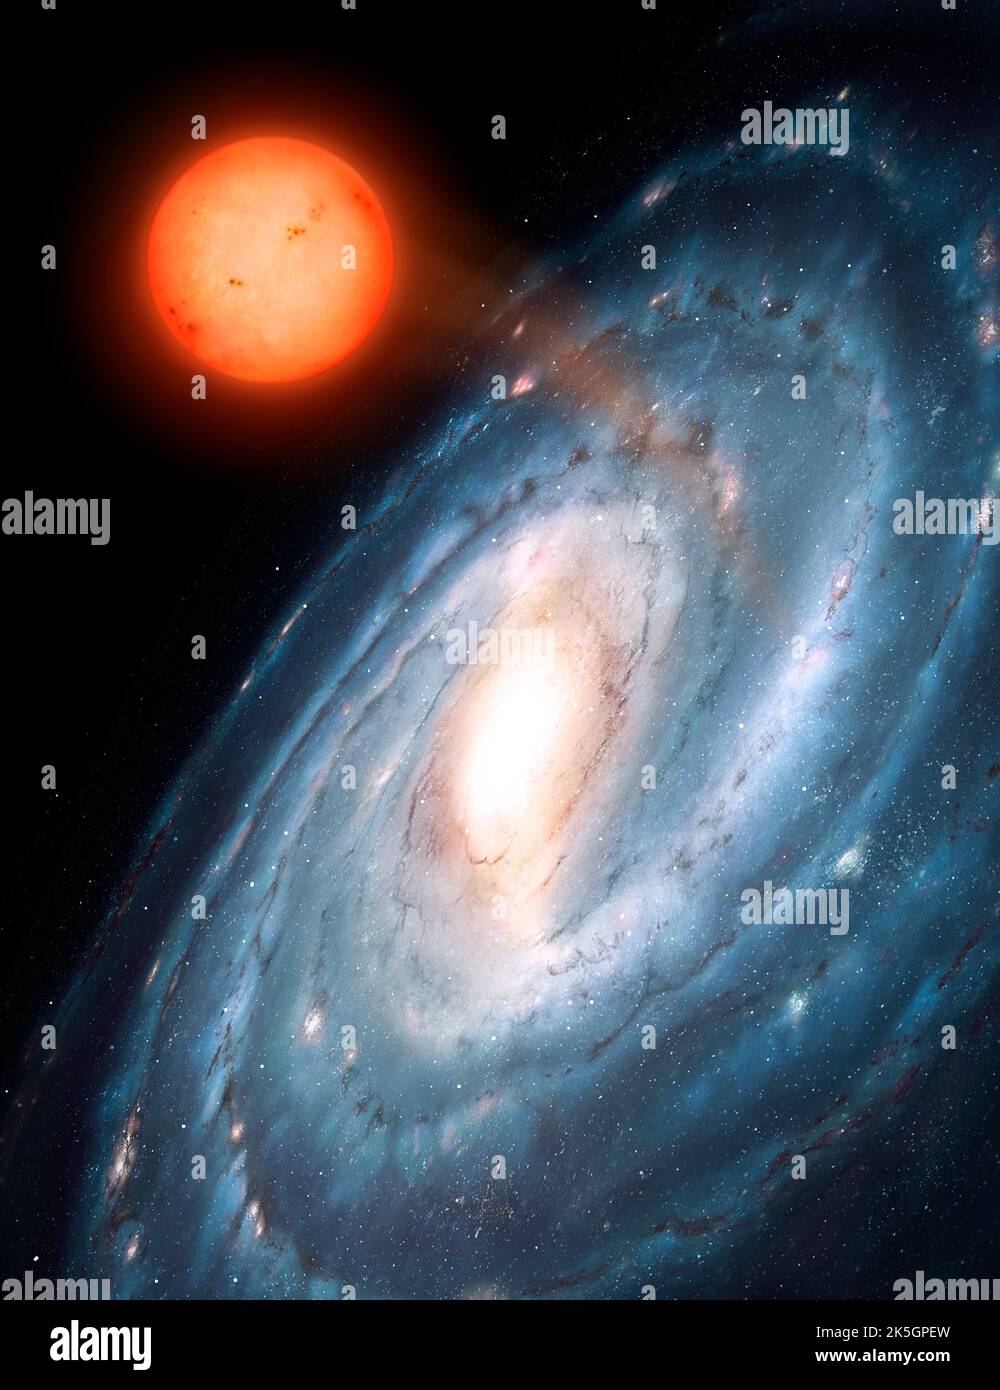 This shows a hypothetical spiral galaxy seen from an oblique angle. A red dwarf star has been ejected by the galaxy at high speeds and will wander the void between galaxies. Such objects are known as free-floating stars. Stock Photo